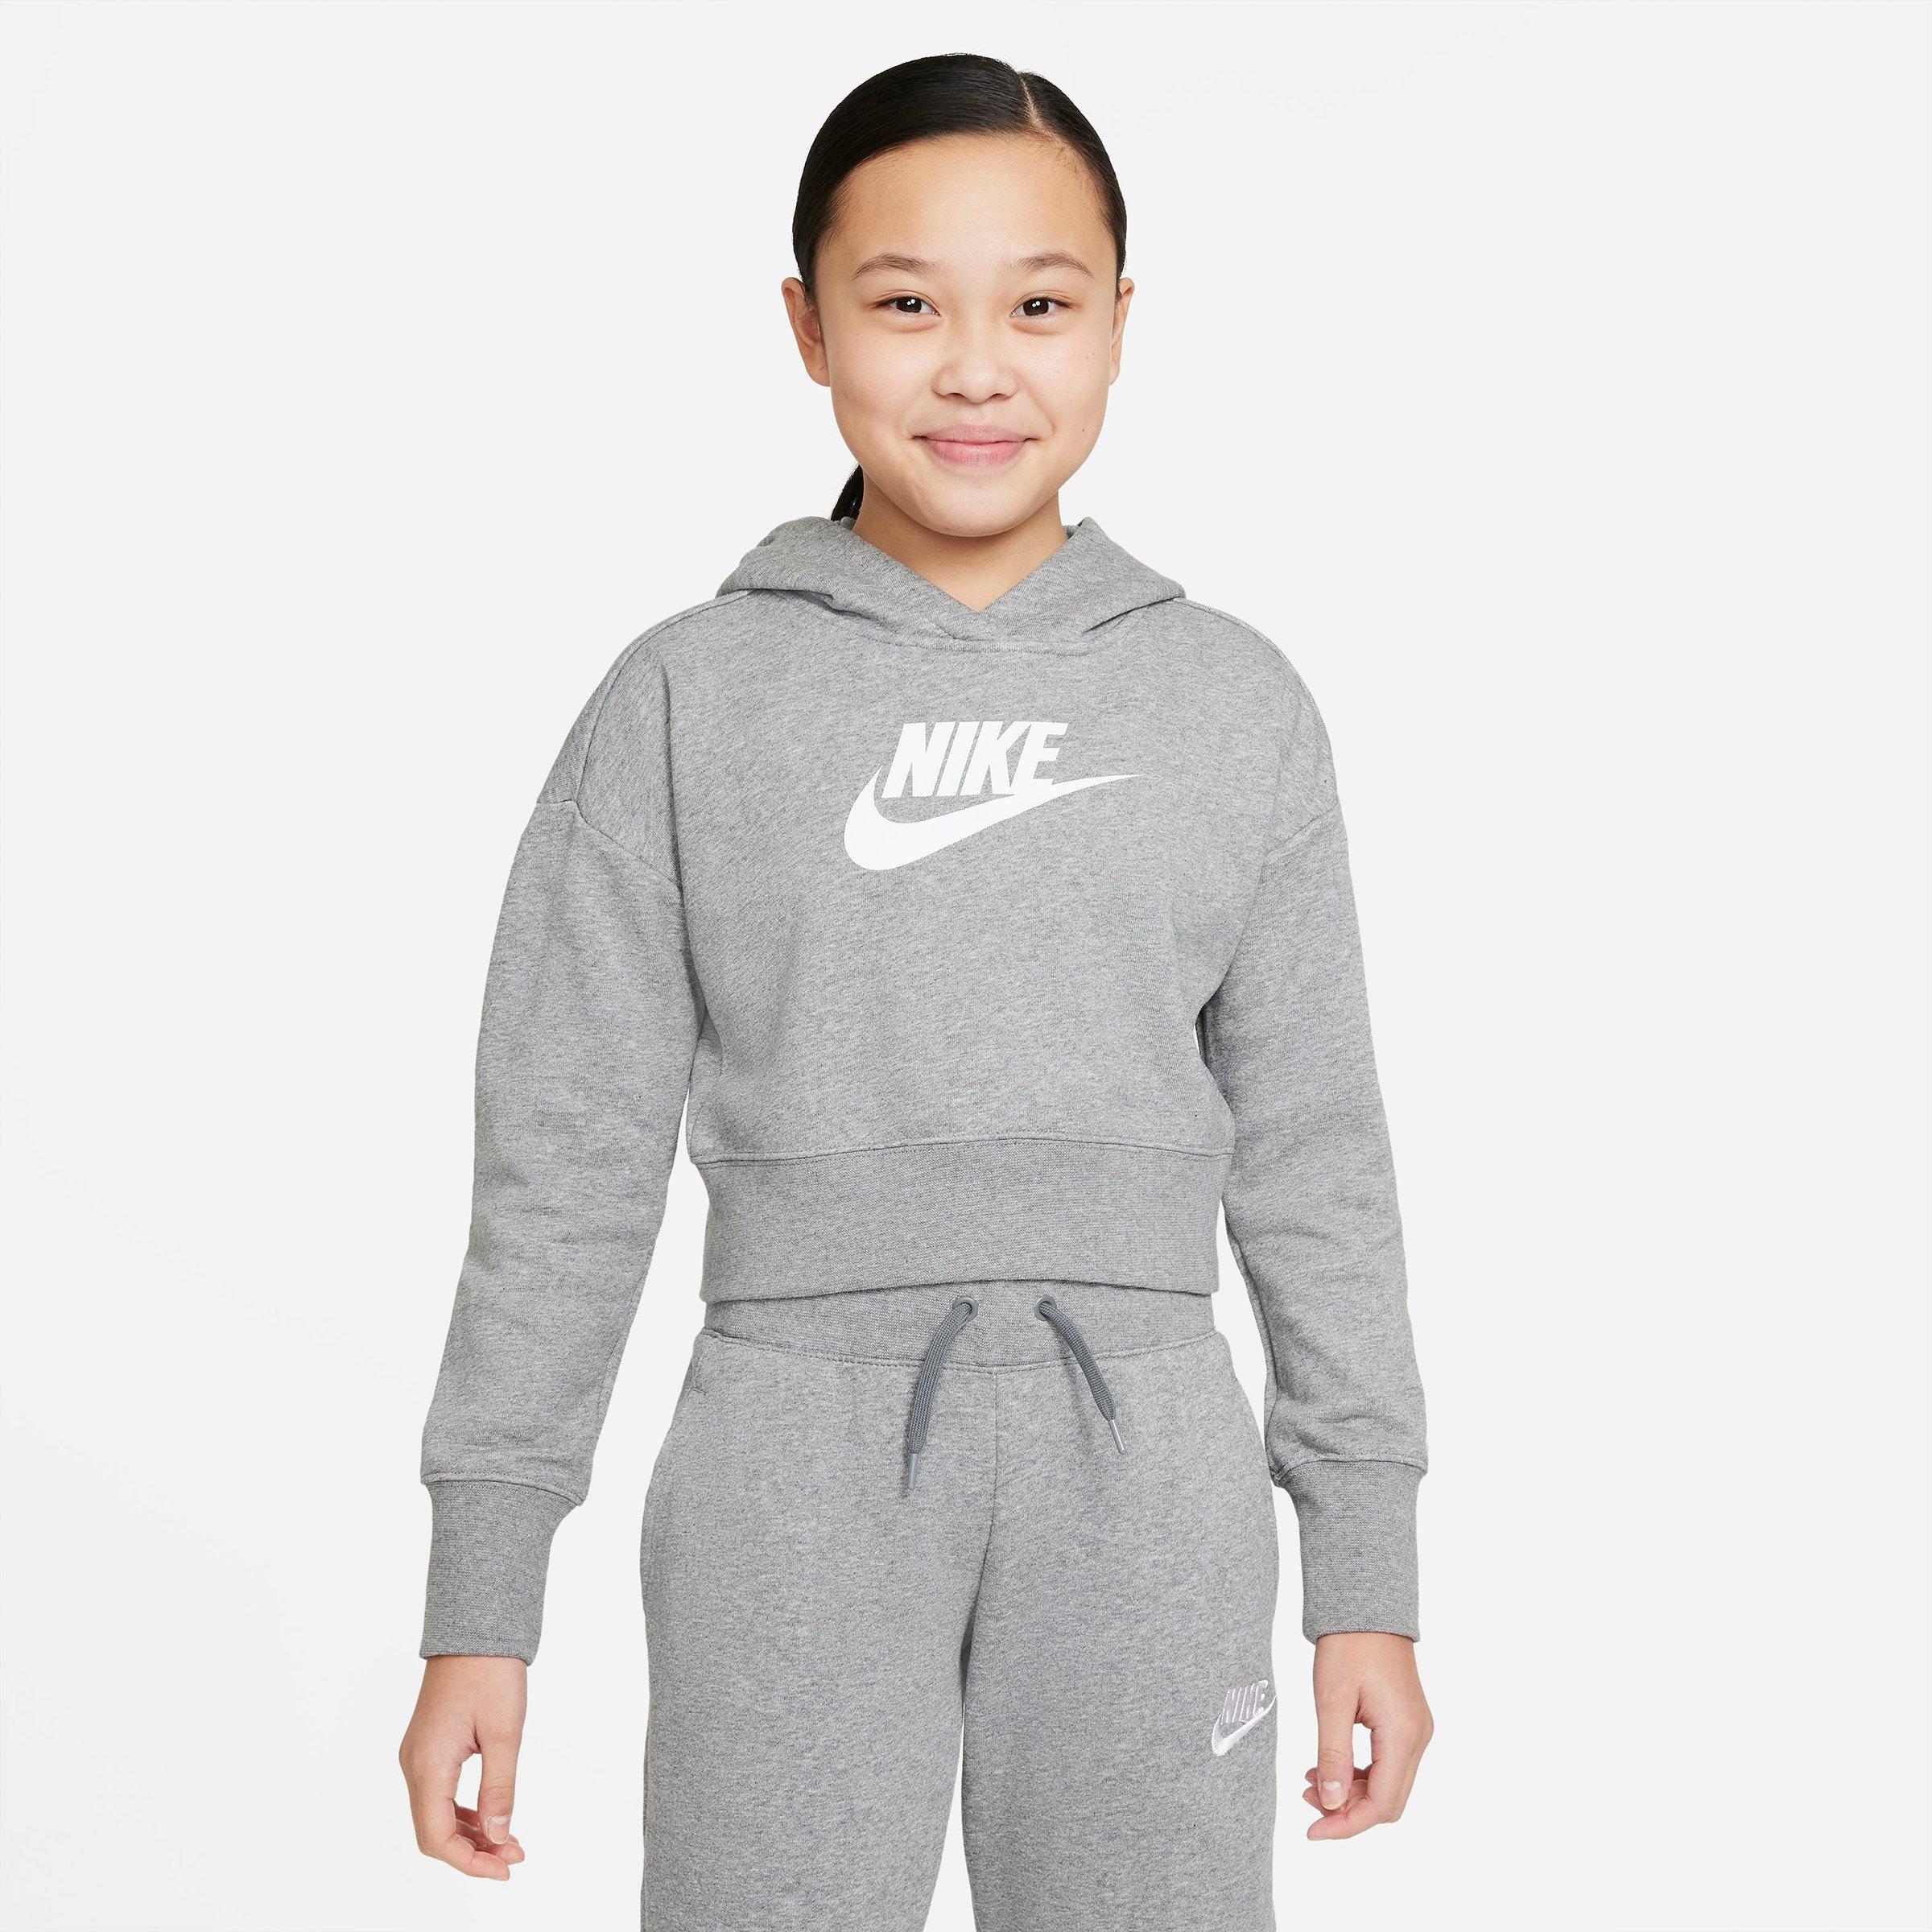 NIKE NIKE GIRLS' SPORTSWEAR CLUB FRENCH TERRY CROPPED PULLOVER HOODIE,5750580